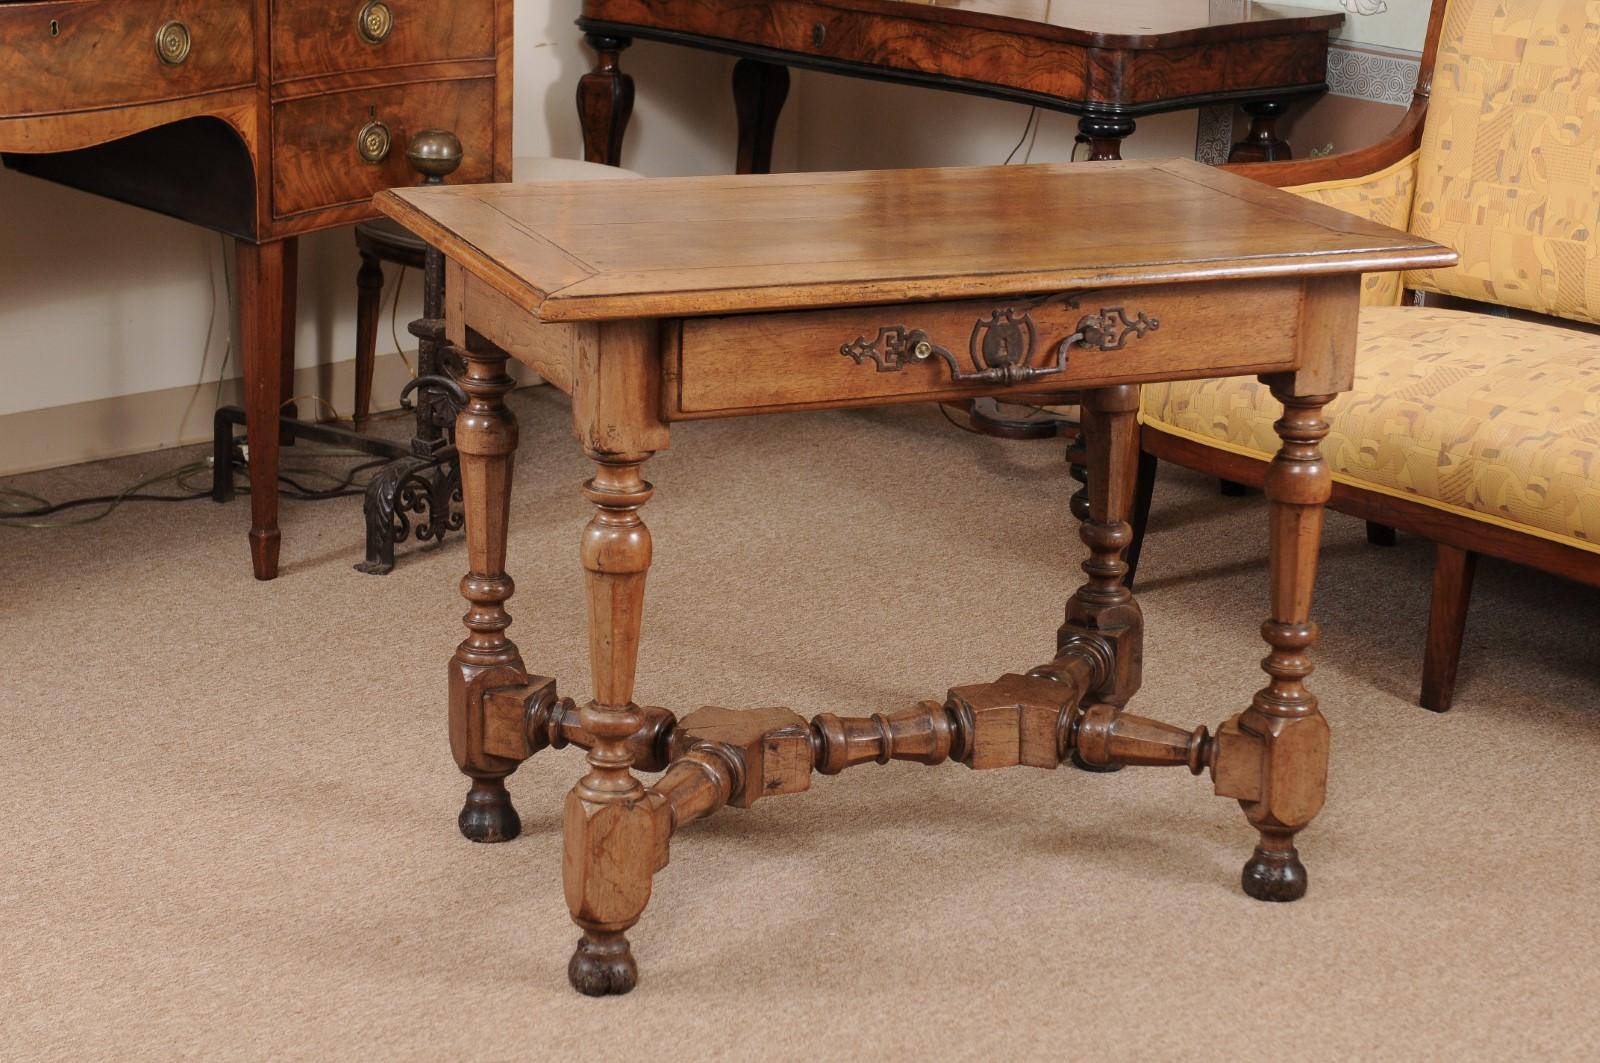 An early 18th century Louis XIV walnut table with rectangular molded top, long drawer in frieze with intricate wrought iron center pull, and turned legs below joined by X-form stretcher ending in bun feet. The table is finished on all sides. 

 